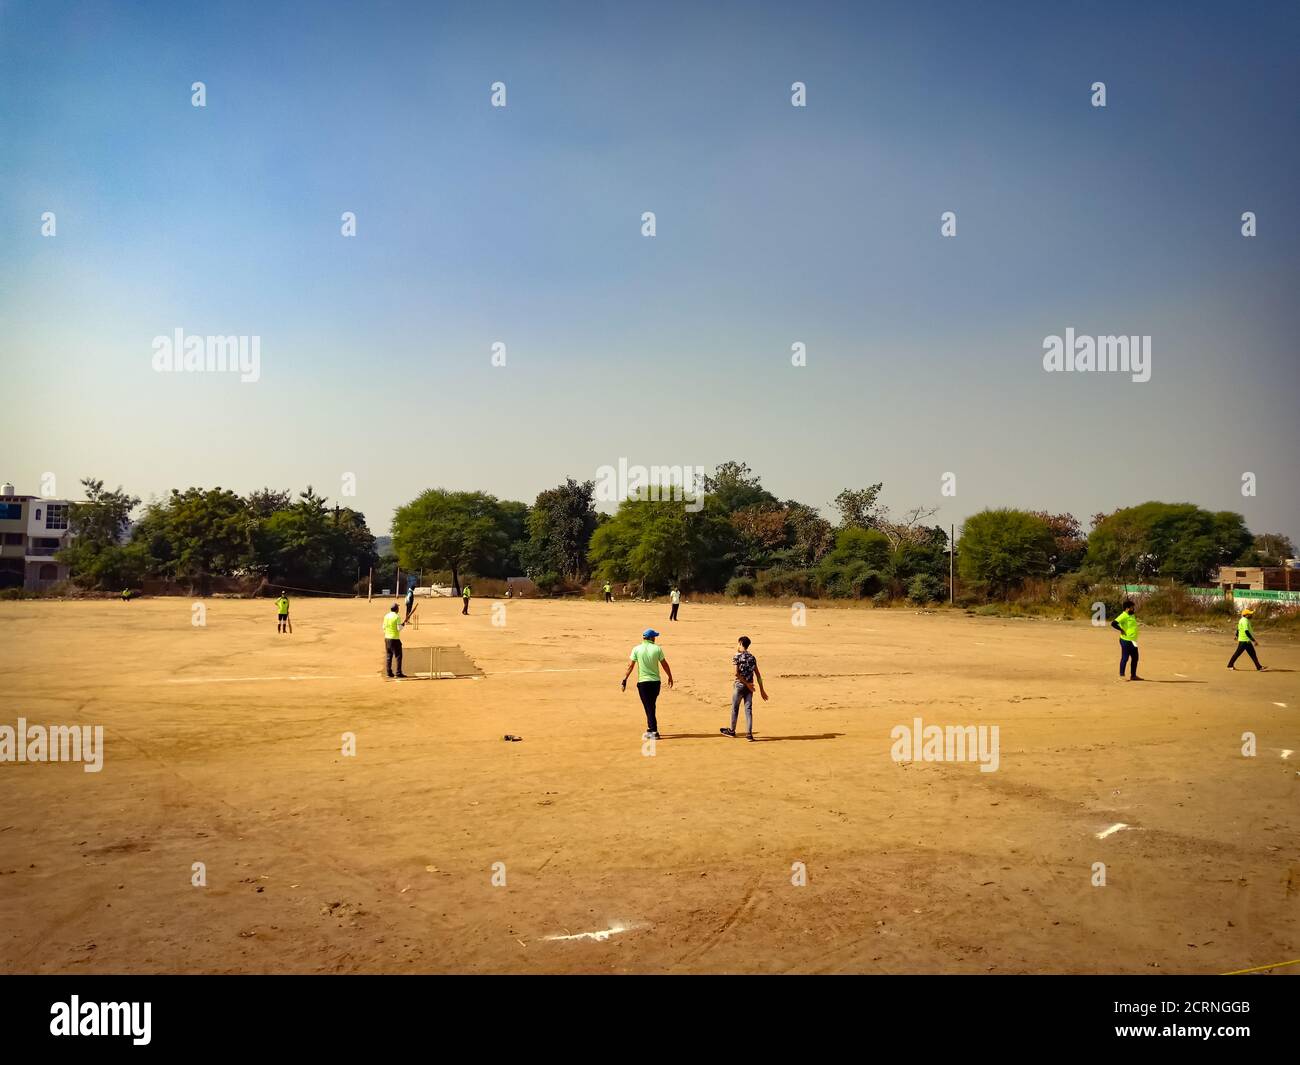 Indian people playing cricket on soil field at blue sky background. Stock Photo